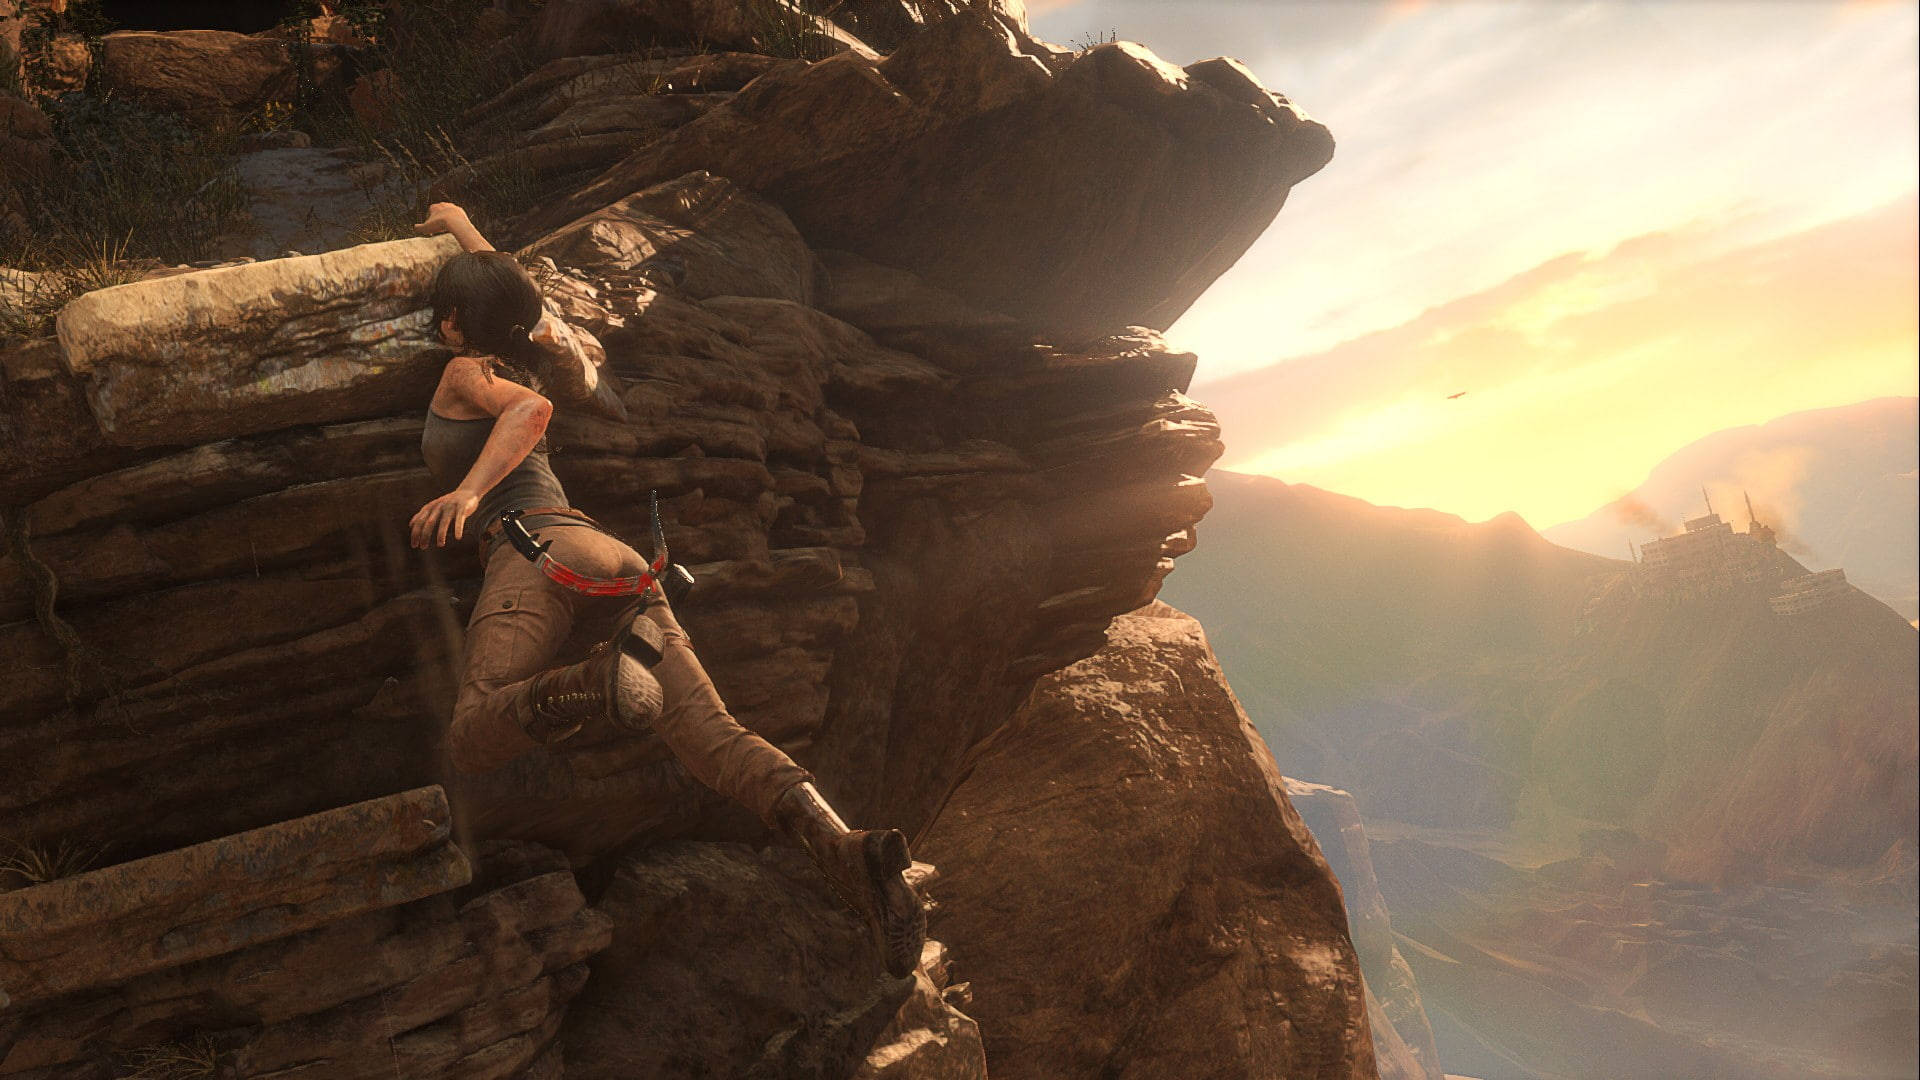 Intense Cliff Hanging Moment In Rise Of The Tomb Raider.